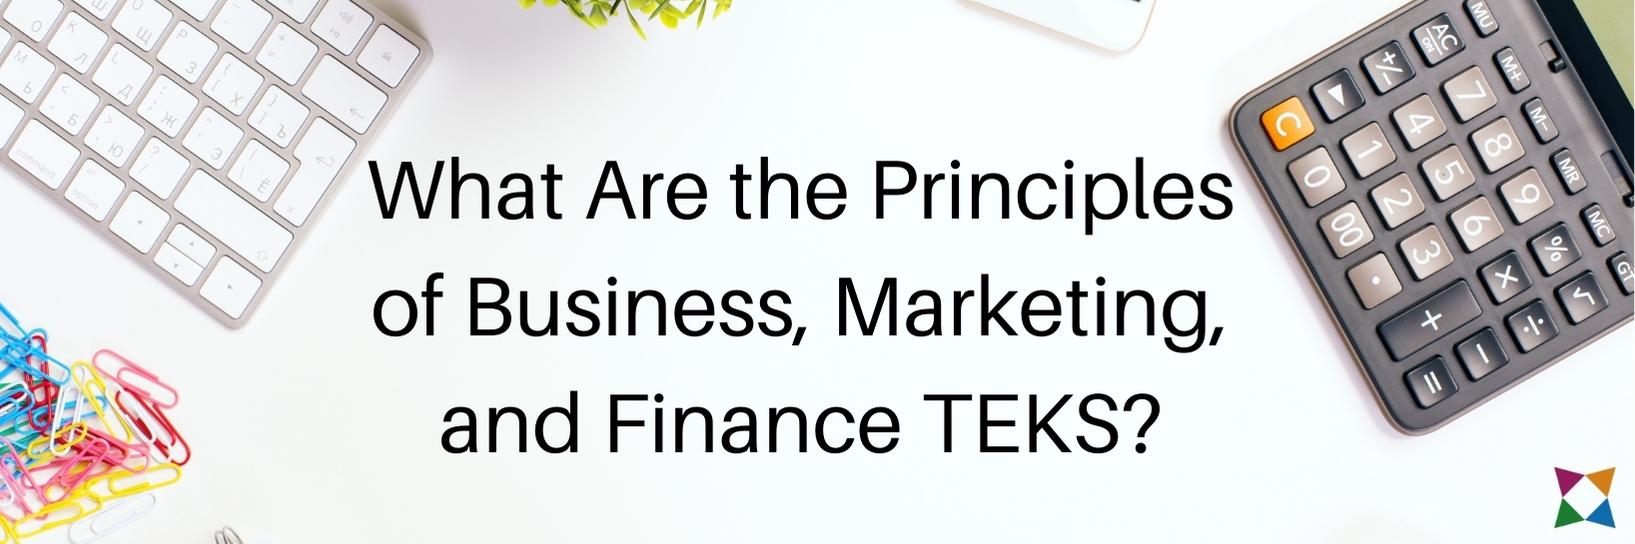 What Are the Principles of Business, Marketing, and Finance TEKS?